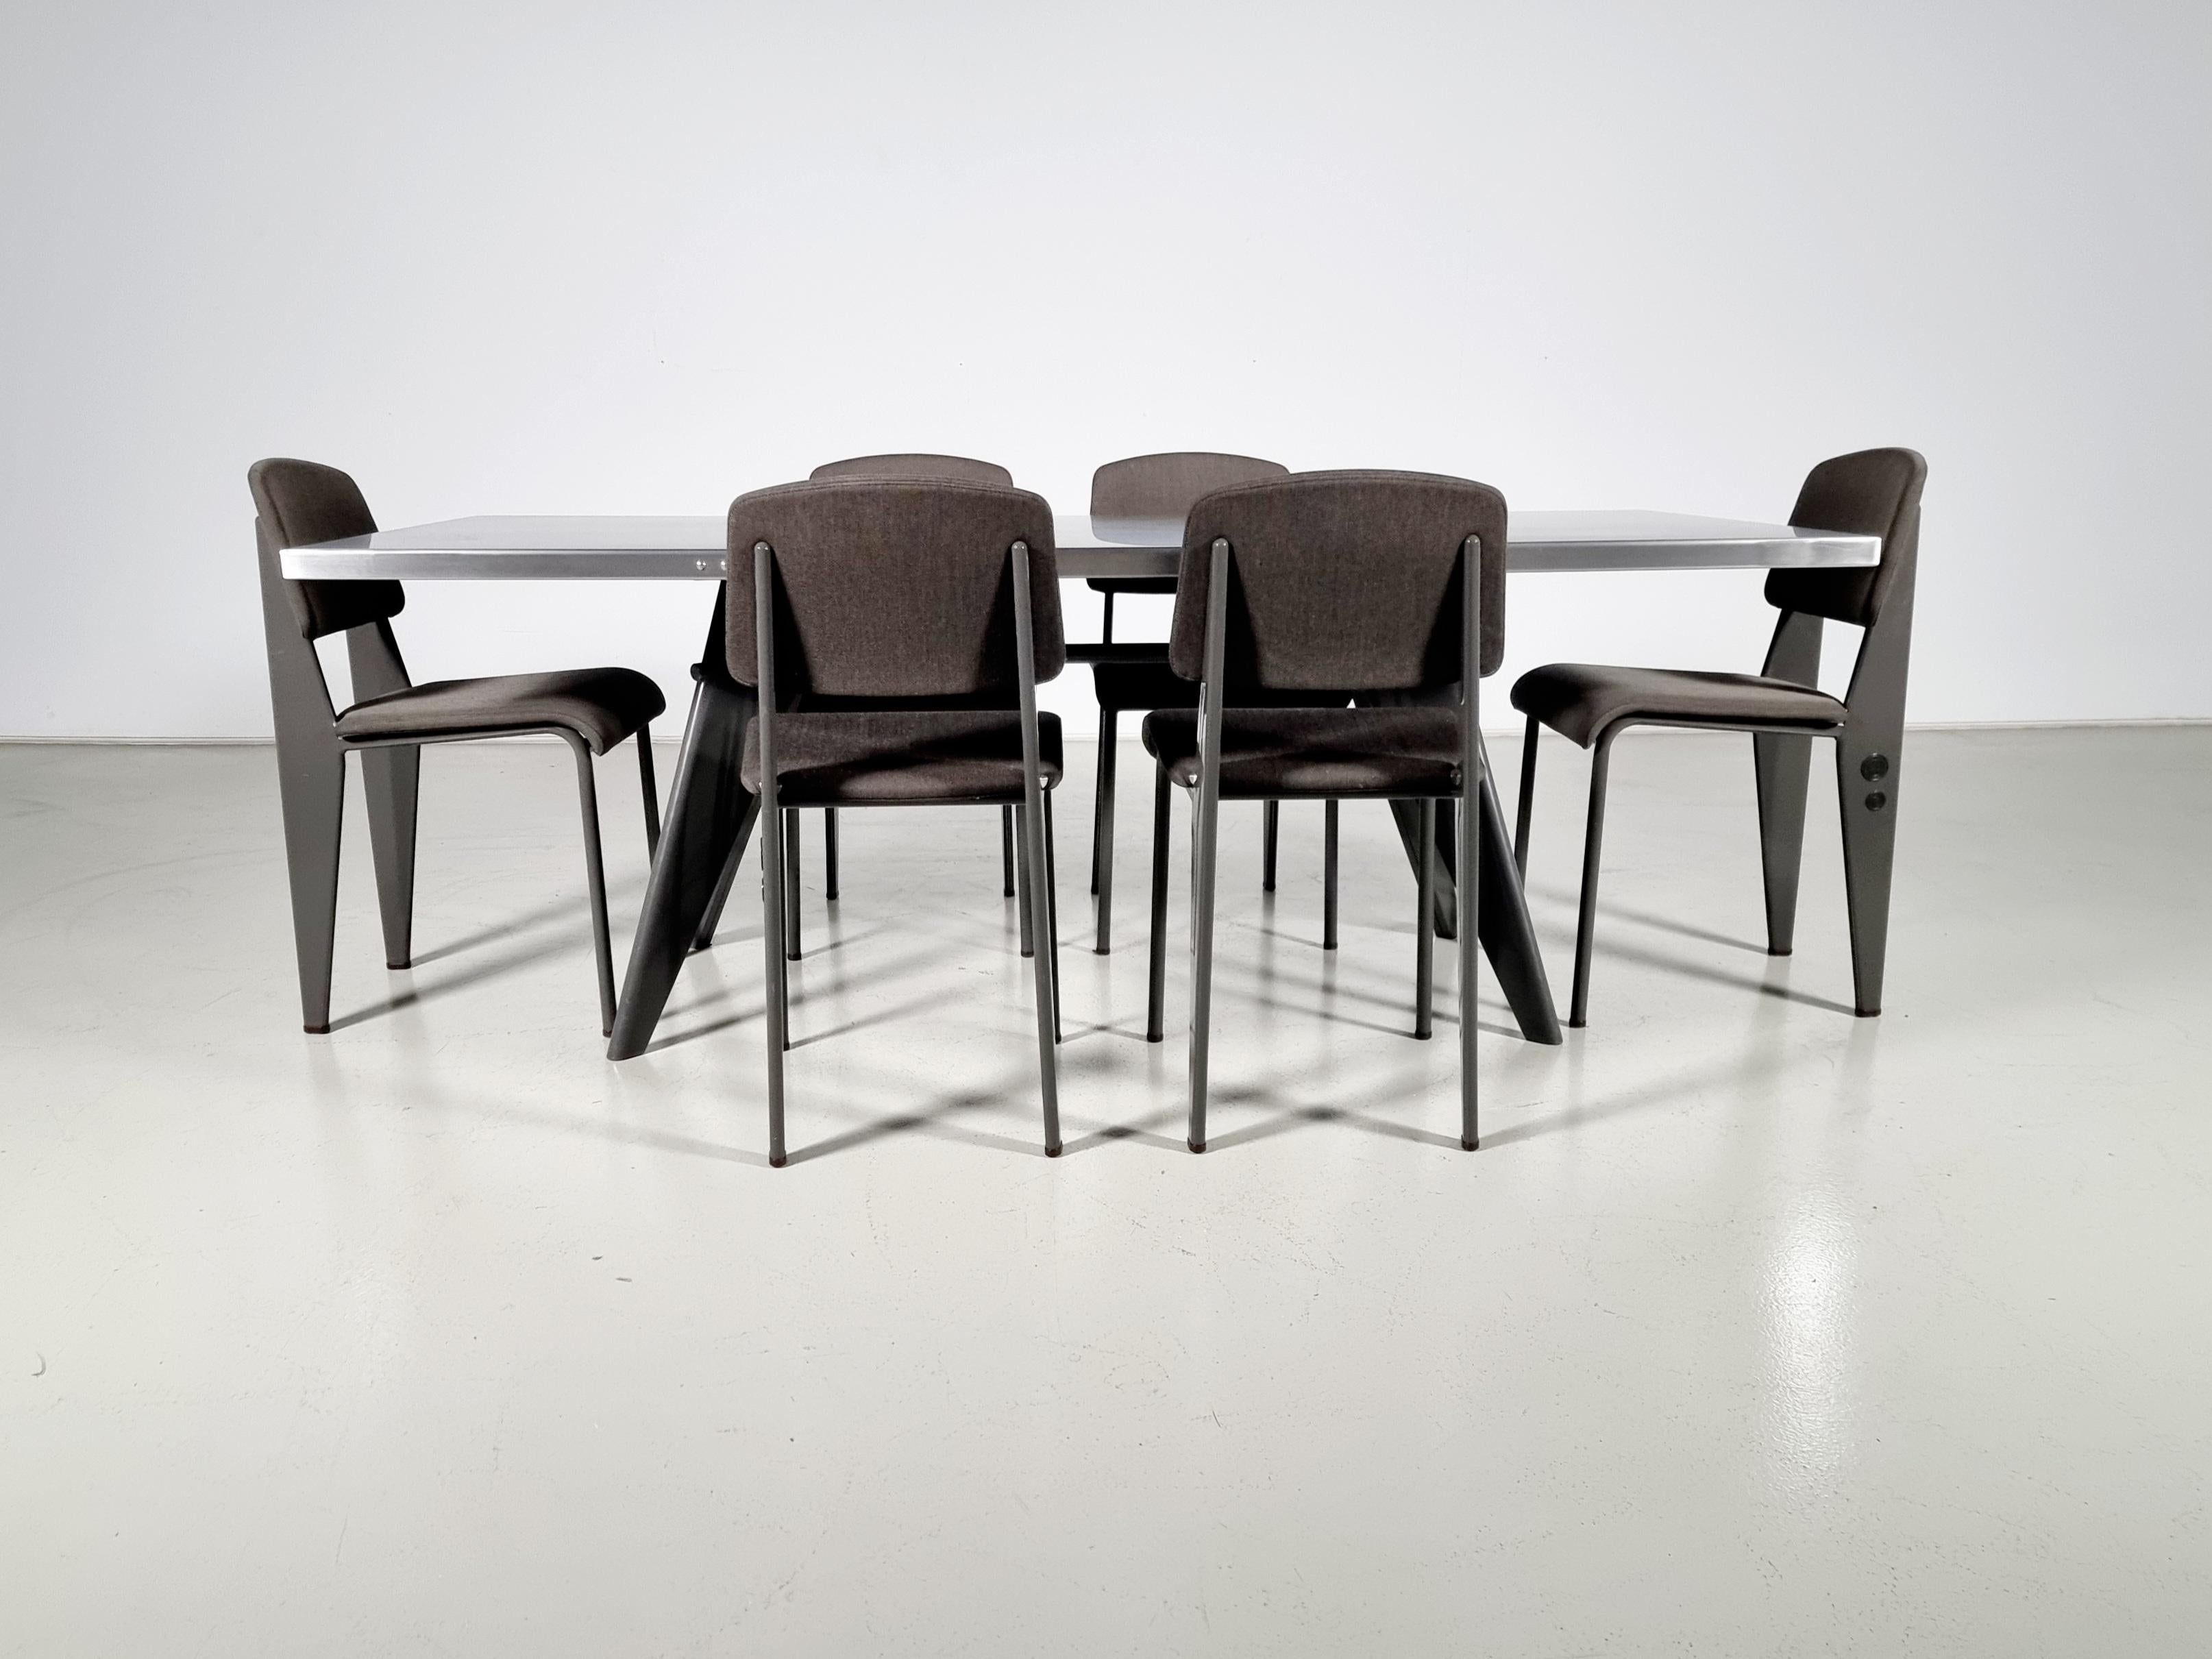 Post-Modern Jean Prouve by G-Star Raw for Vitra S.A.M. Tropique Table with matching chairs For Sale